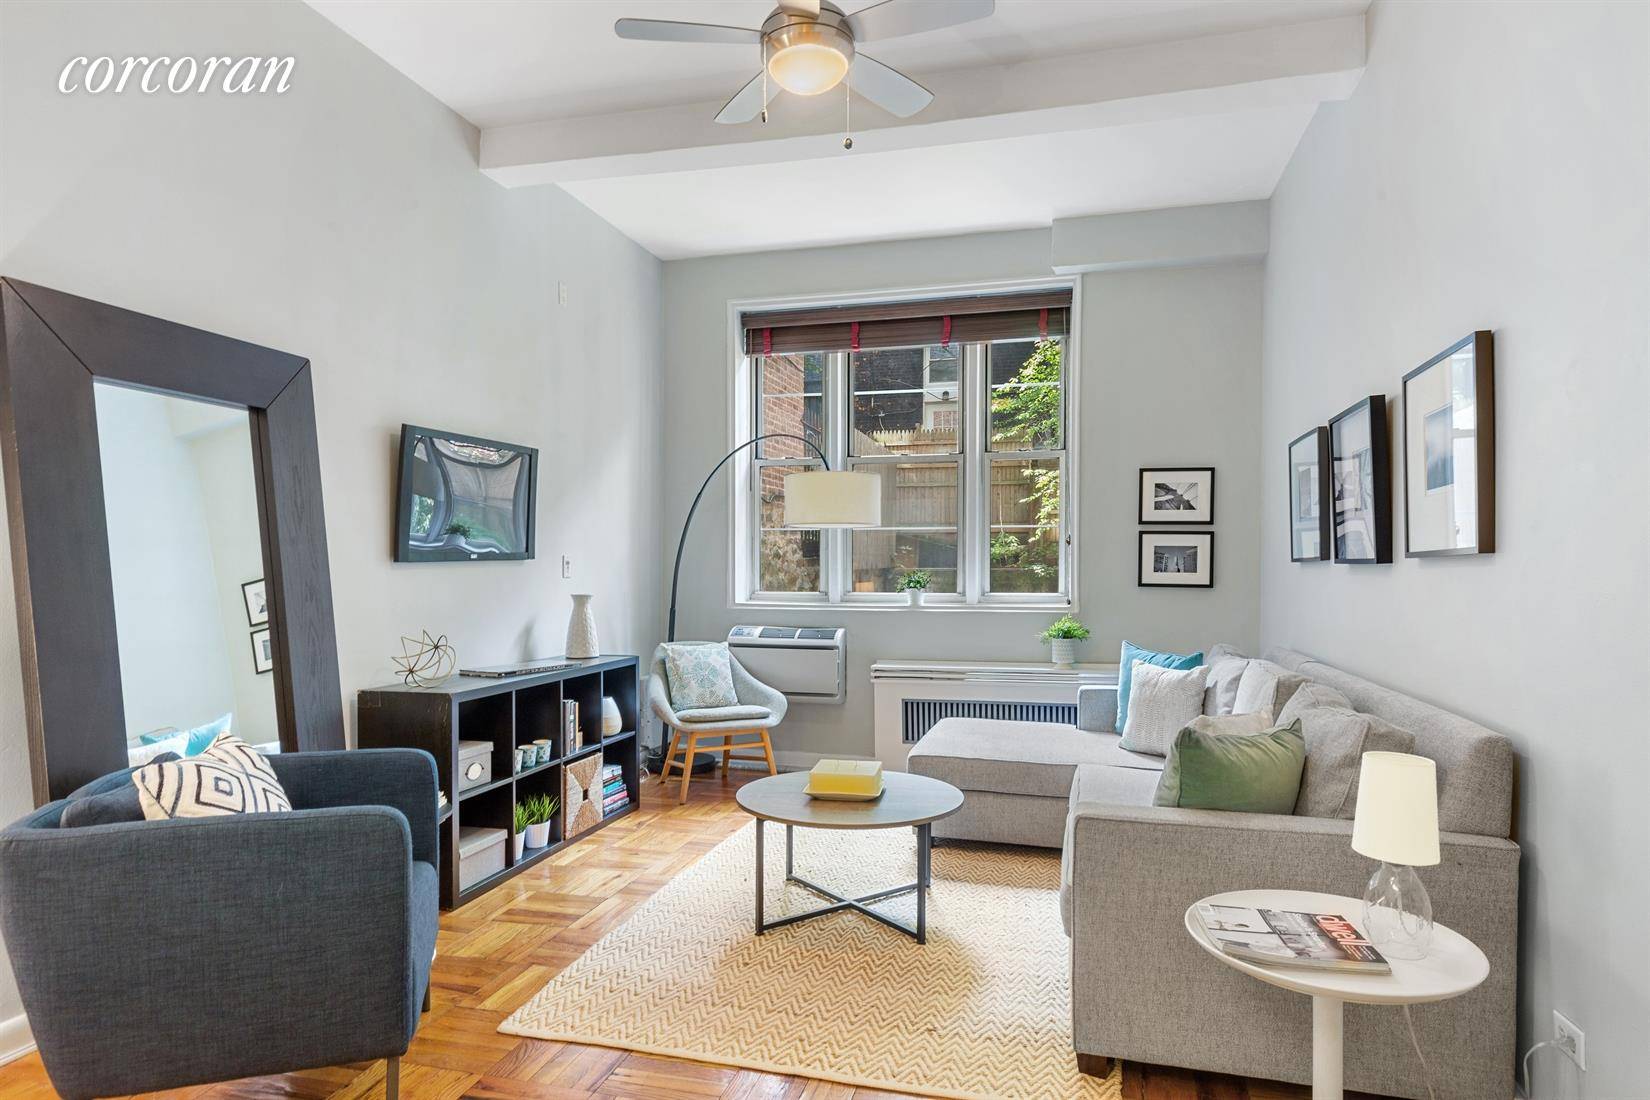 In the heart of historic, tree lined Brooklyn Heights, two blocks from the Promenade and around the corner from the Clark Street 2 3 trains, this renovated studio offers great ...